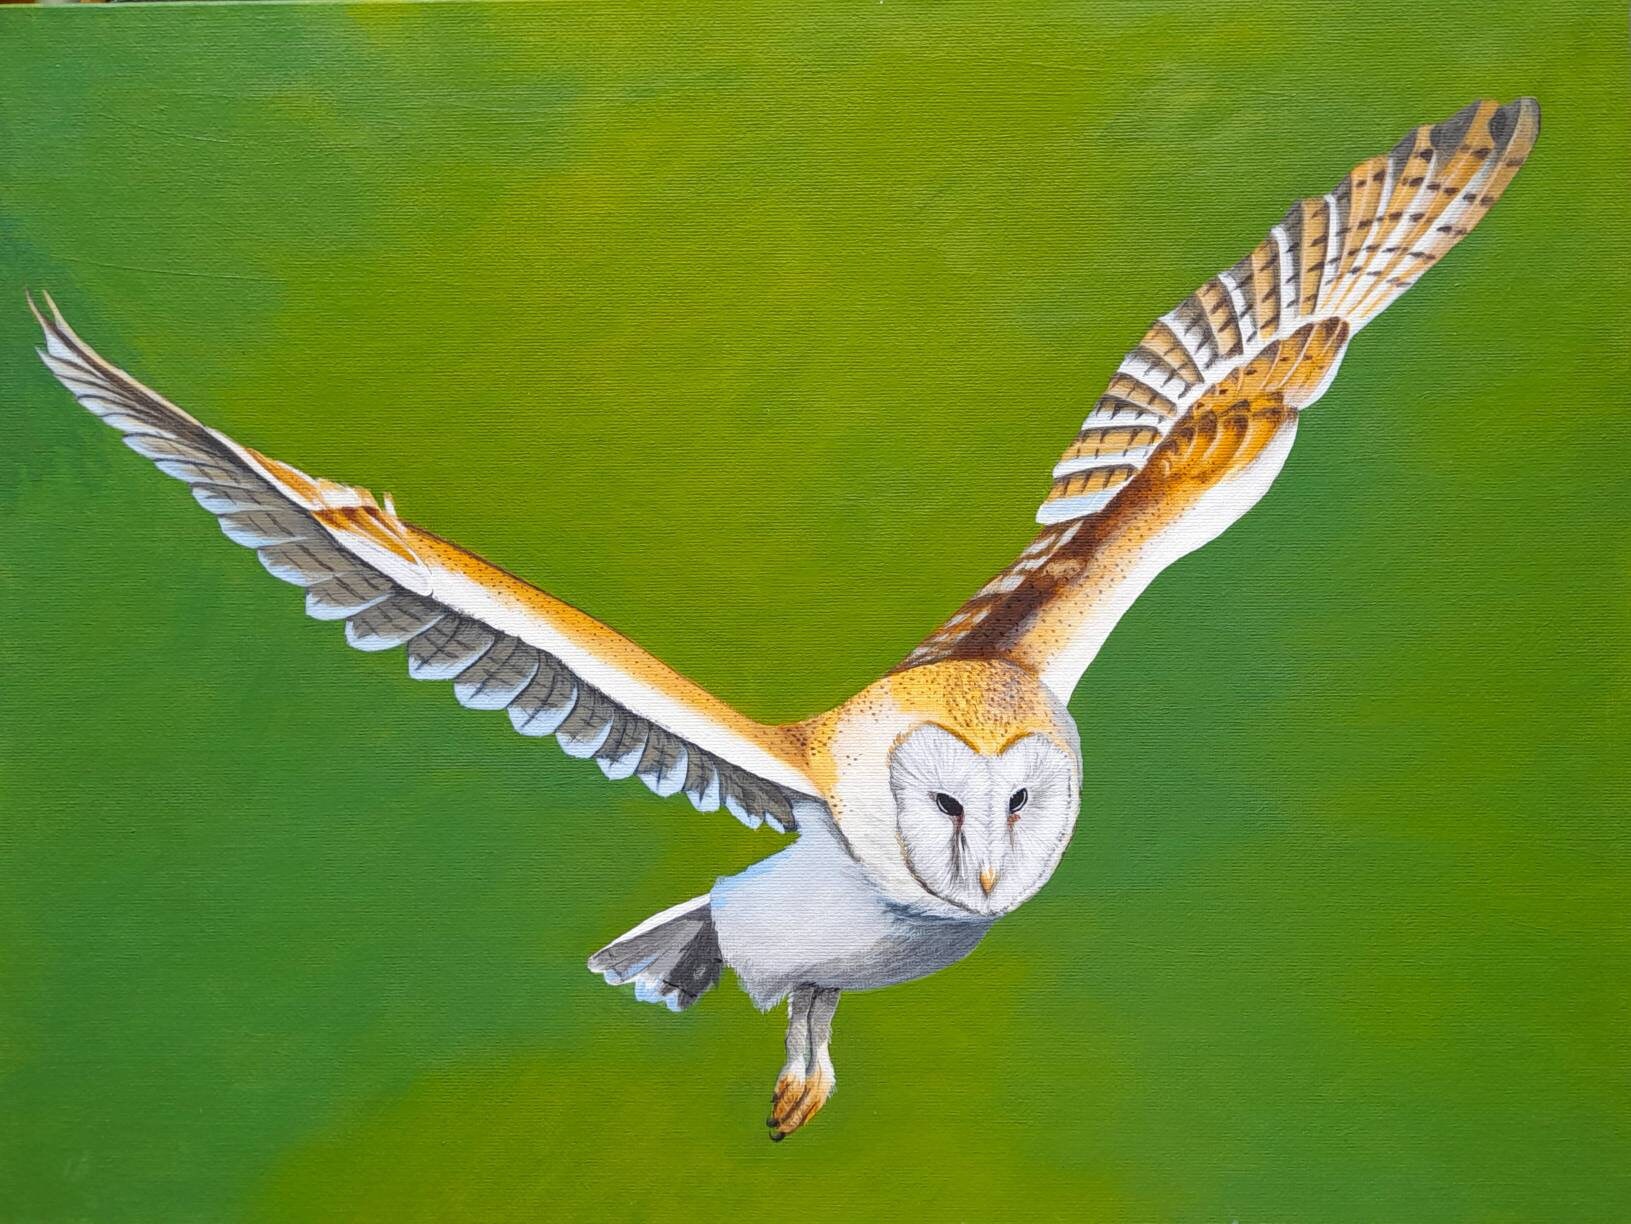 Acrylic painting of a barn owl in flight.